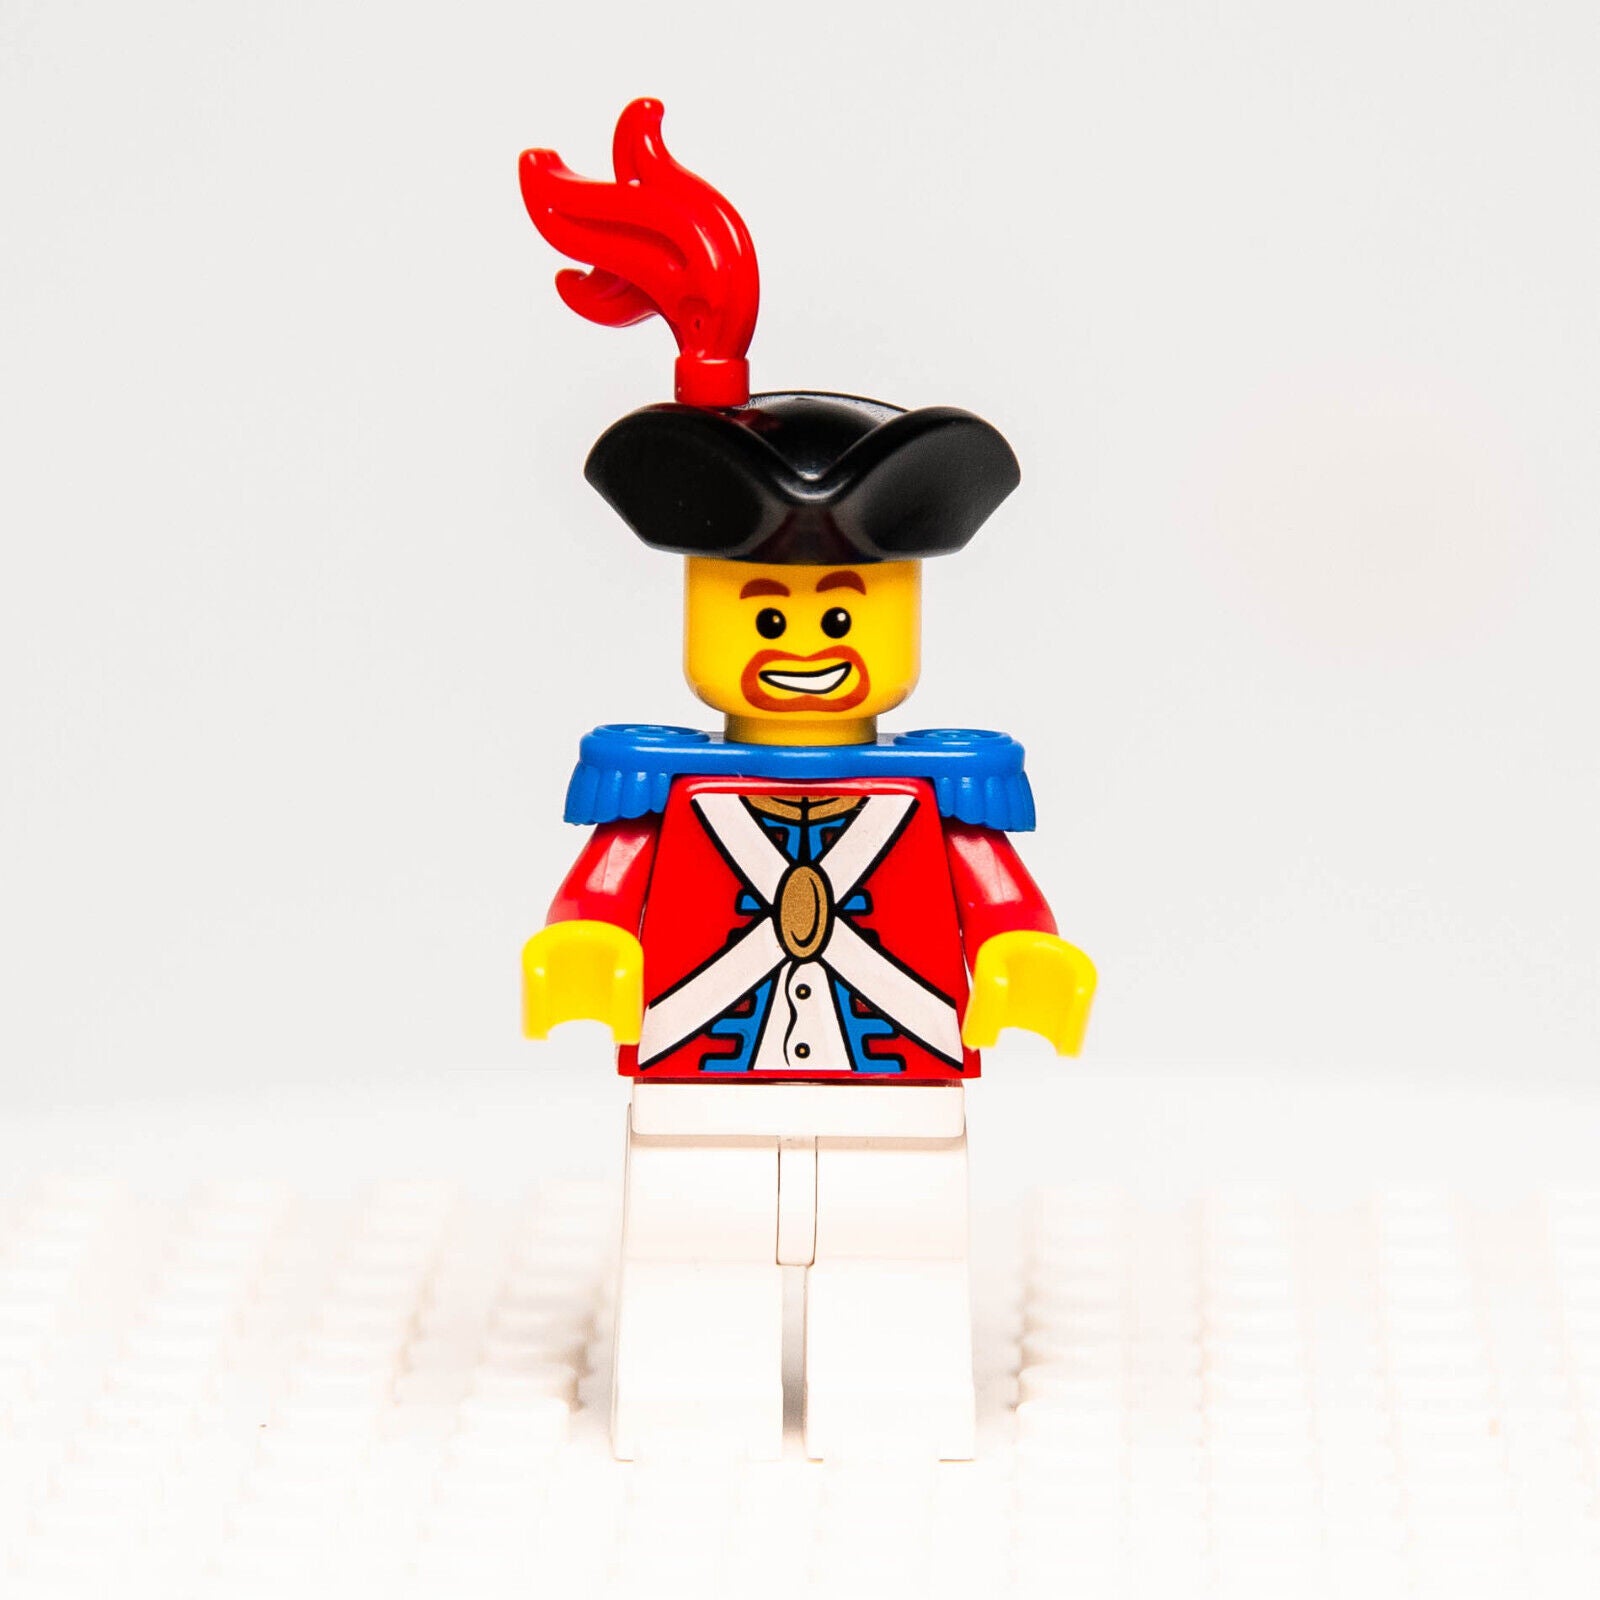 Lego PIrates Minifigure - Imperial Soldier II Red Plume, Brown Beard 6242 (pi089